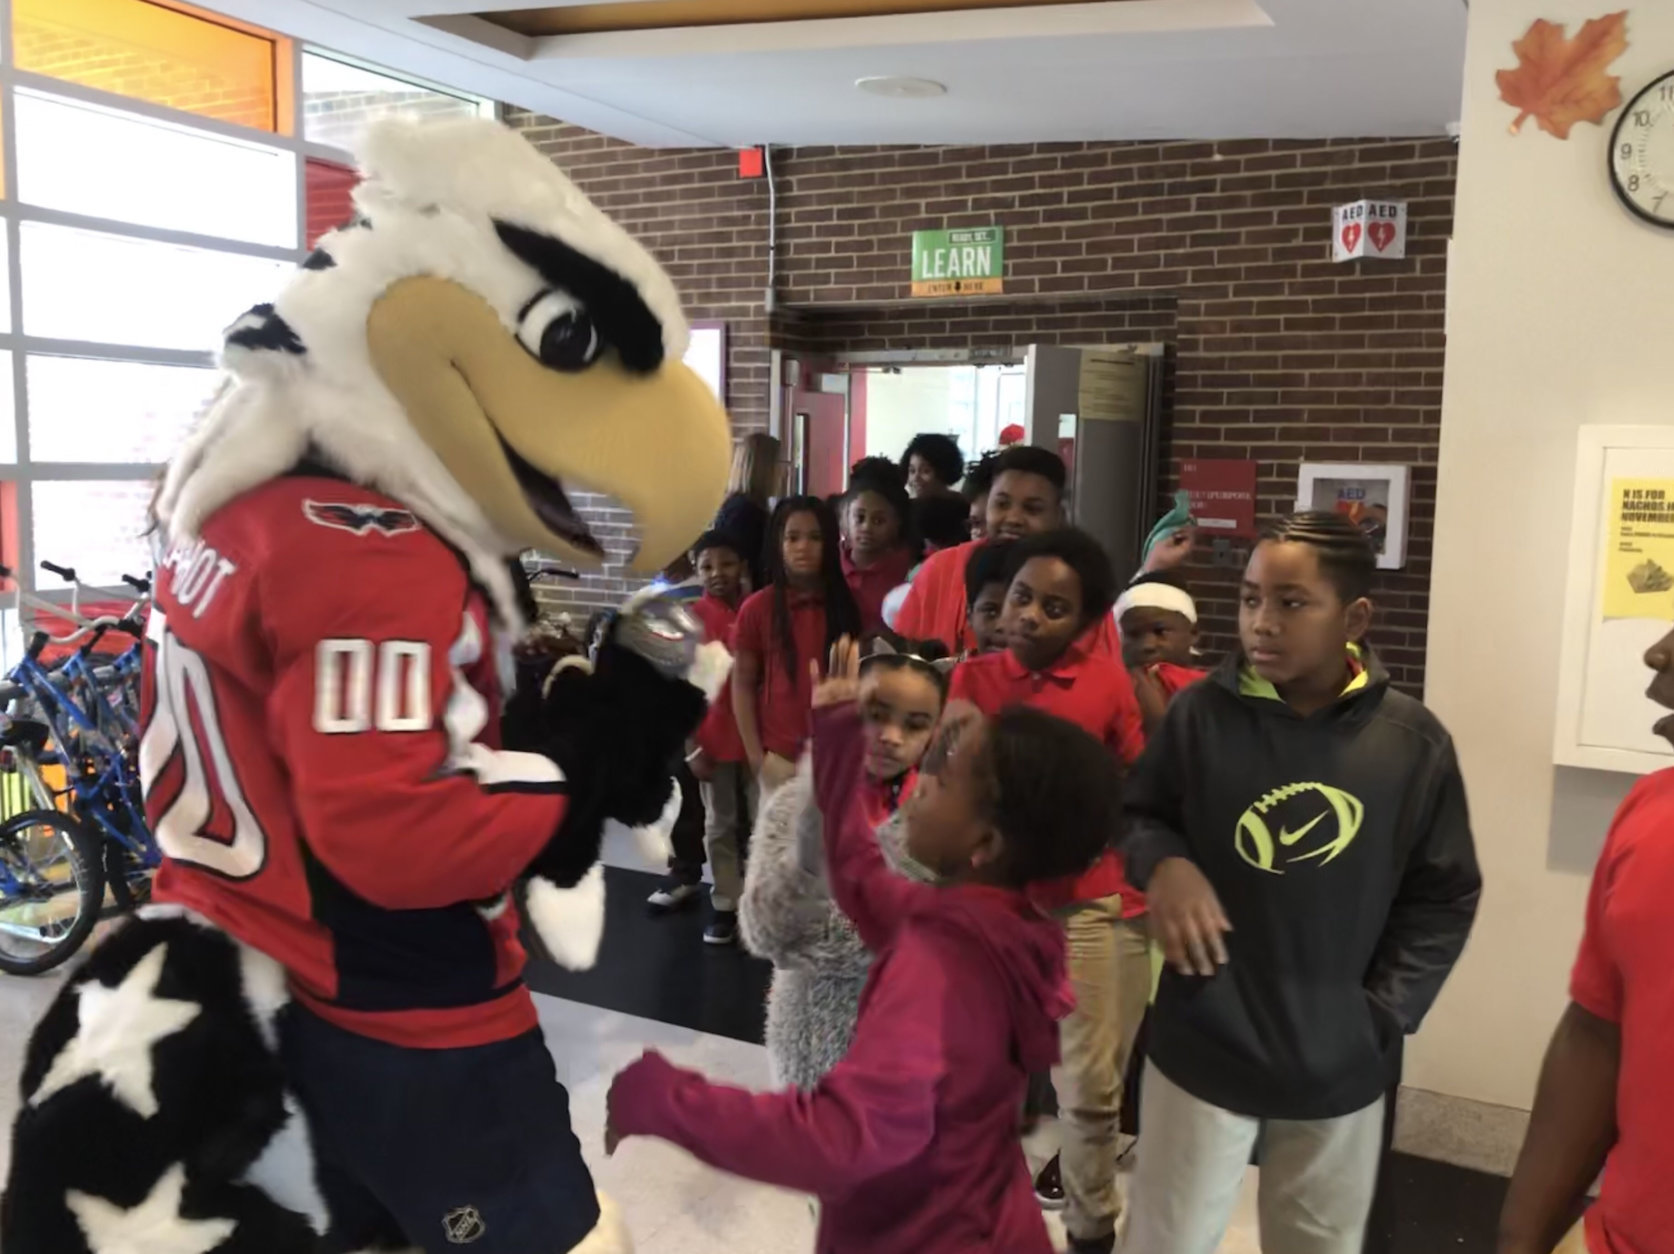 When meeting mascot Slapshot, an astounded child asked, "There's a person in there?" (WTOP/Kristi King)